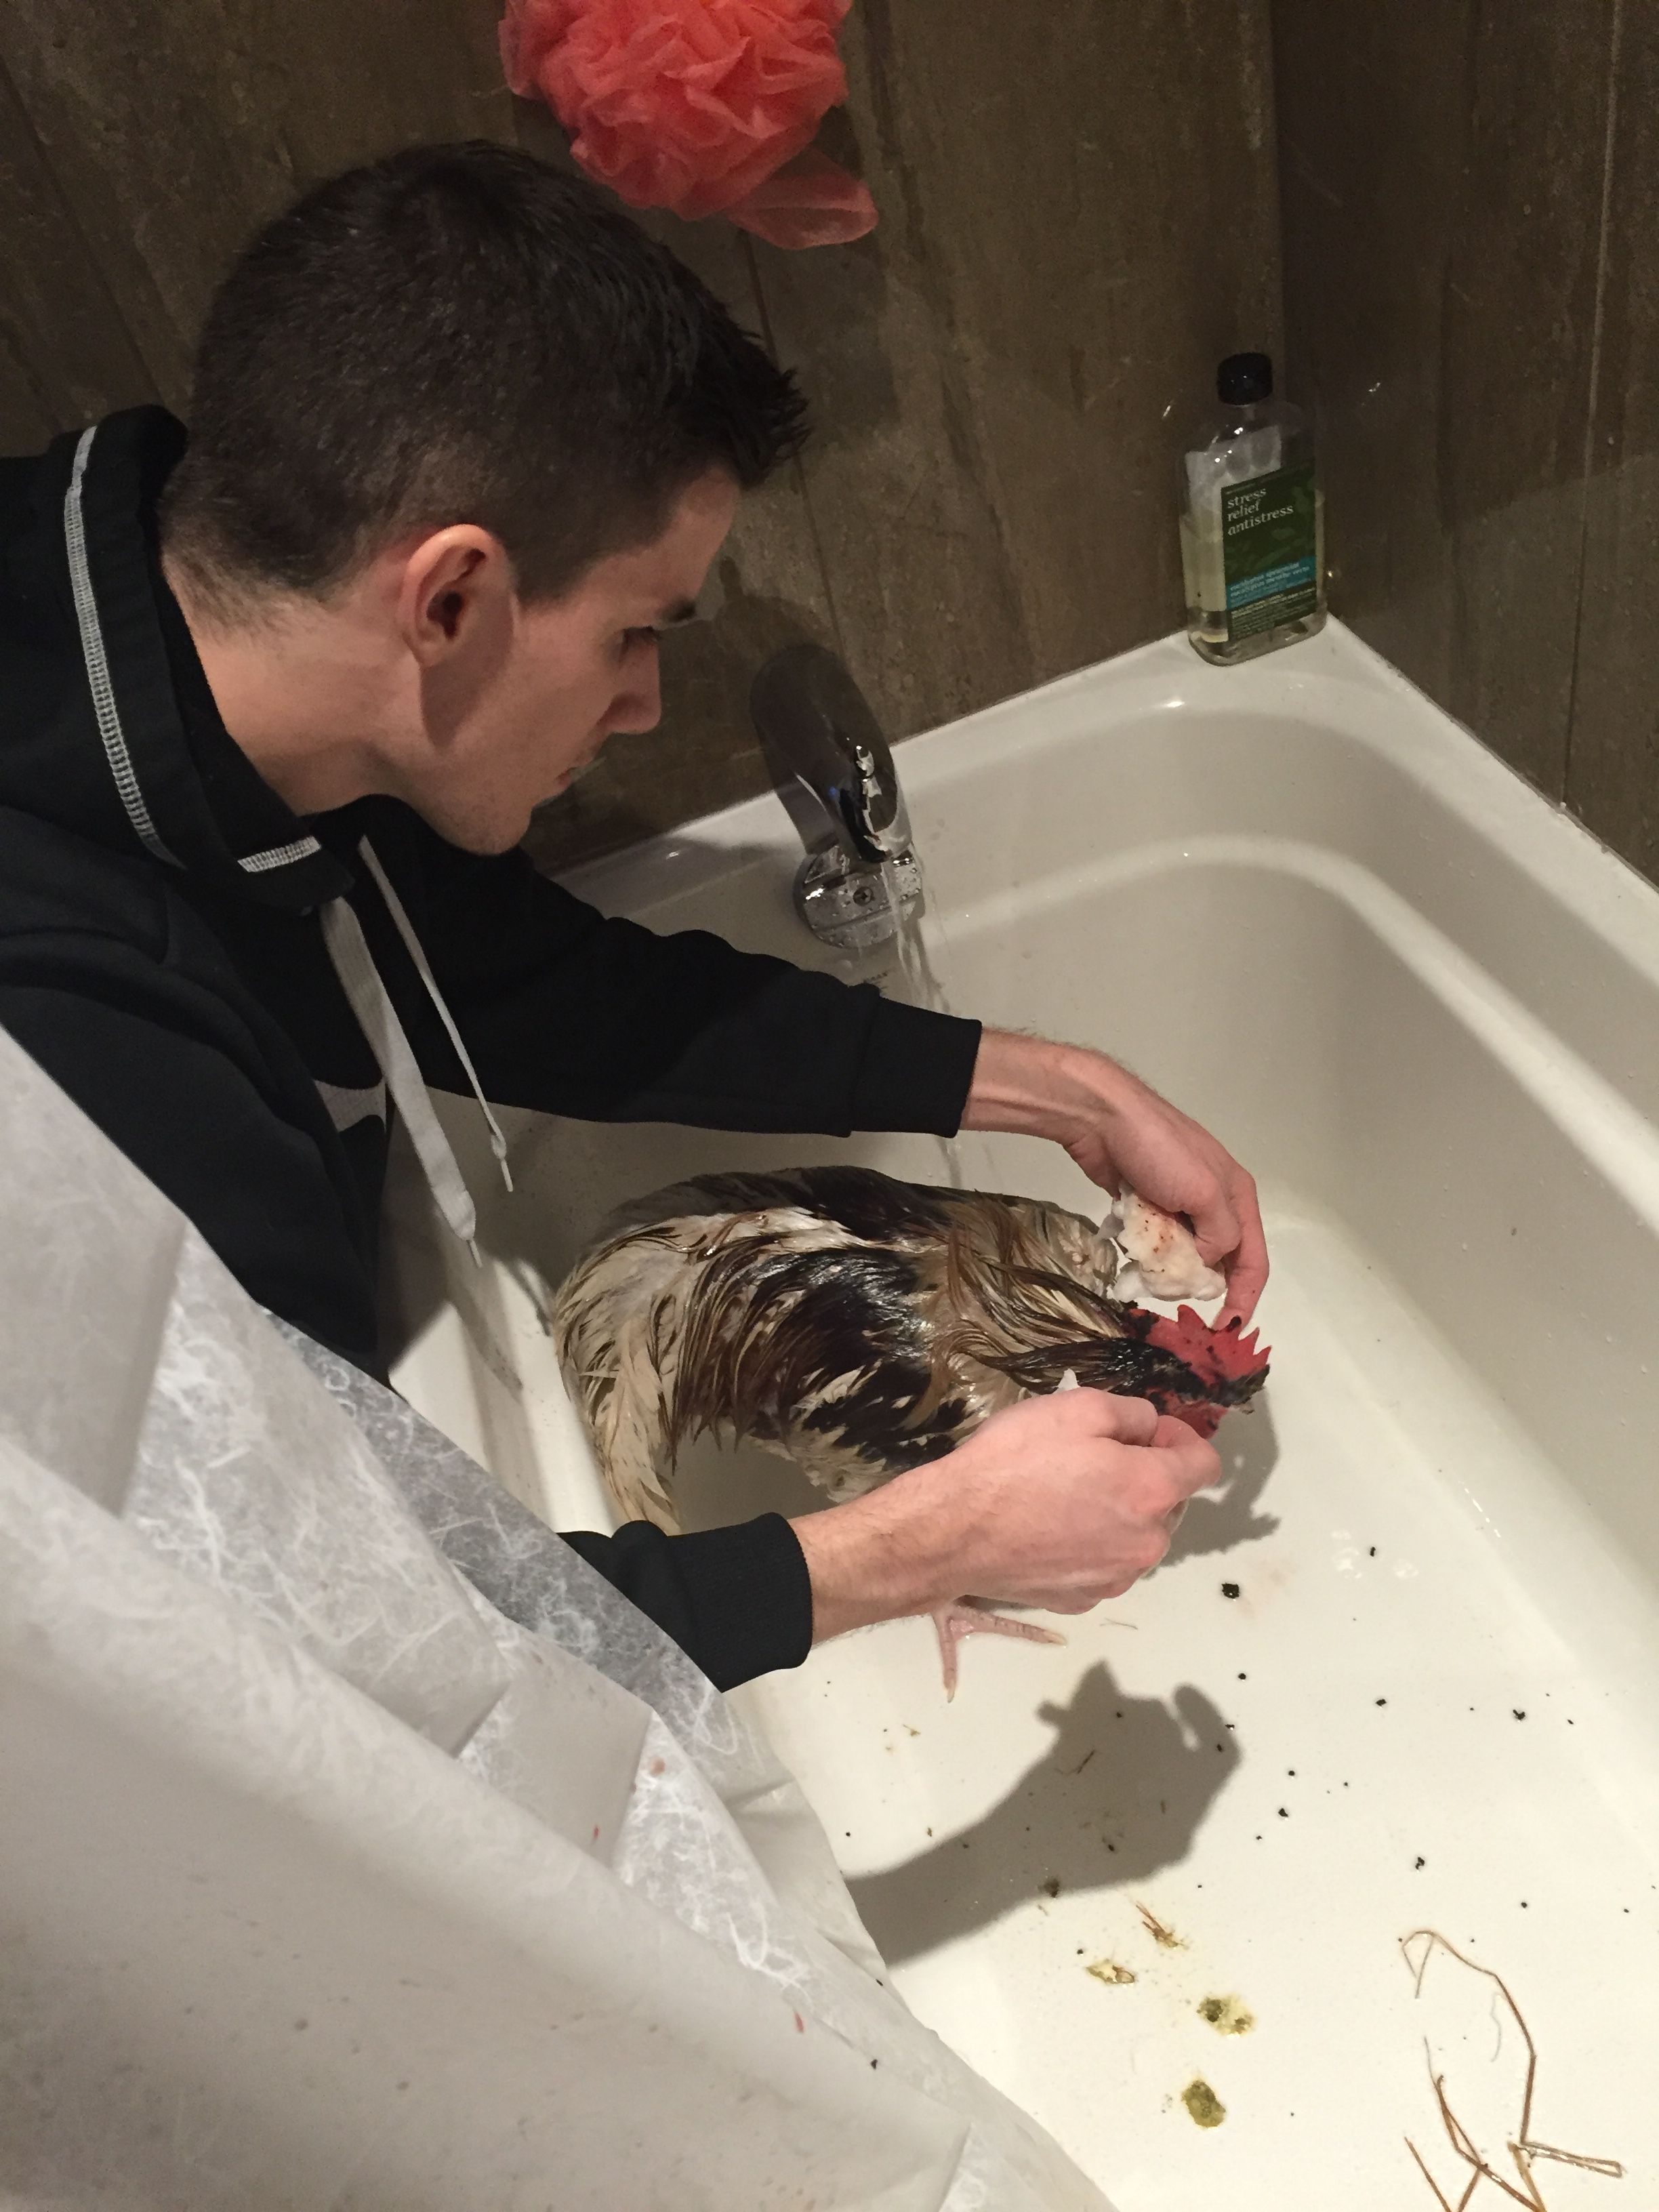 We found White Guy covered in congealed blood and unable to see. We took him inside for a bath as it was snowy outside.